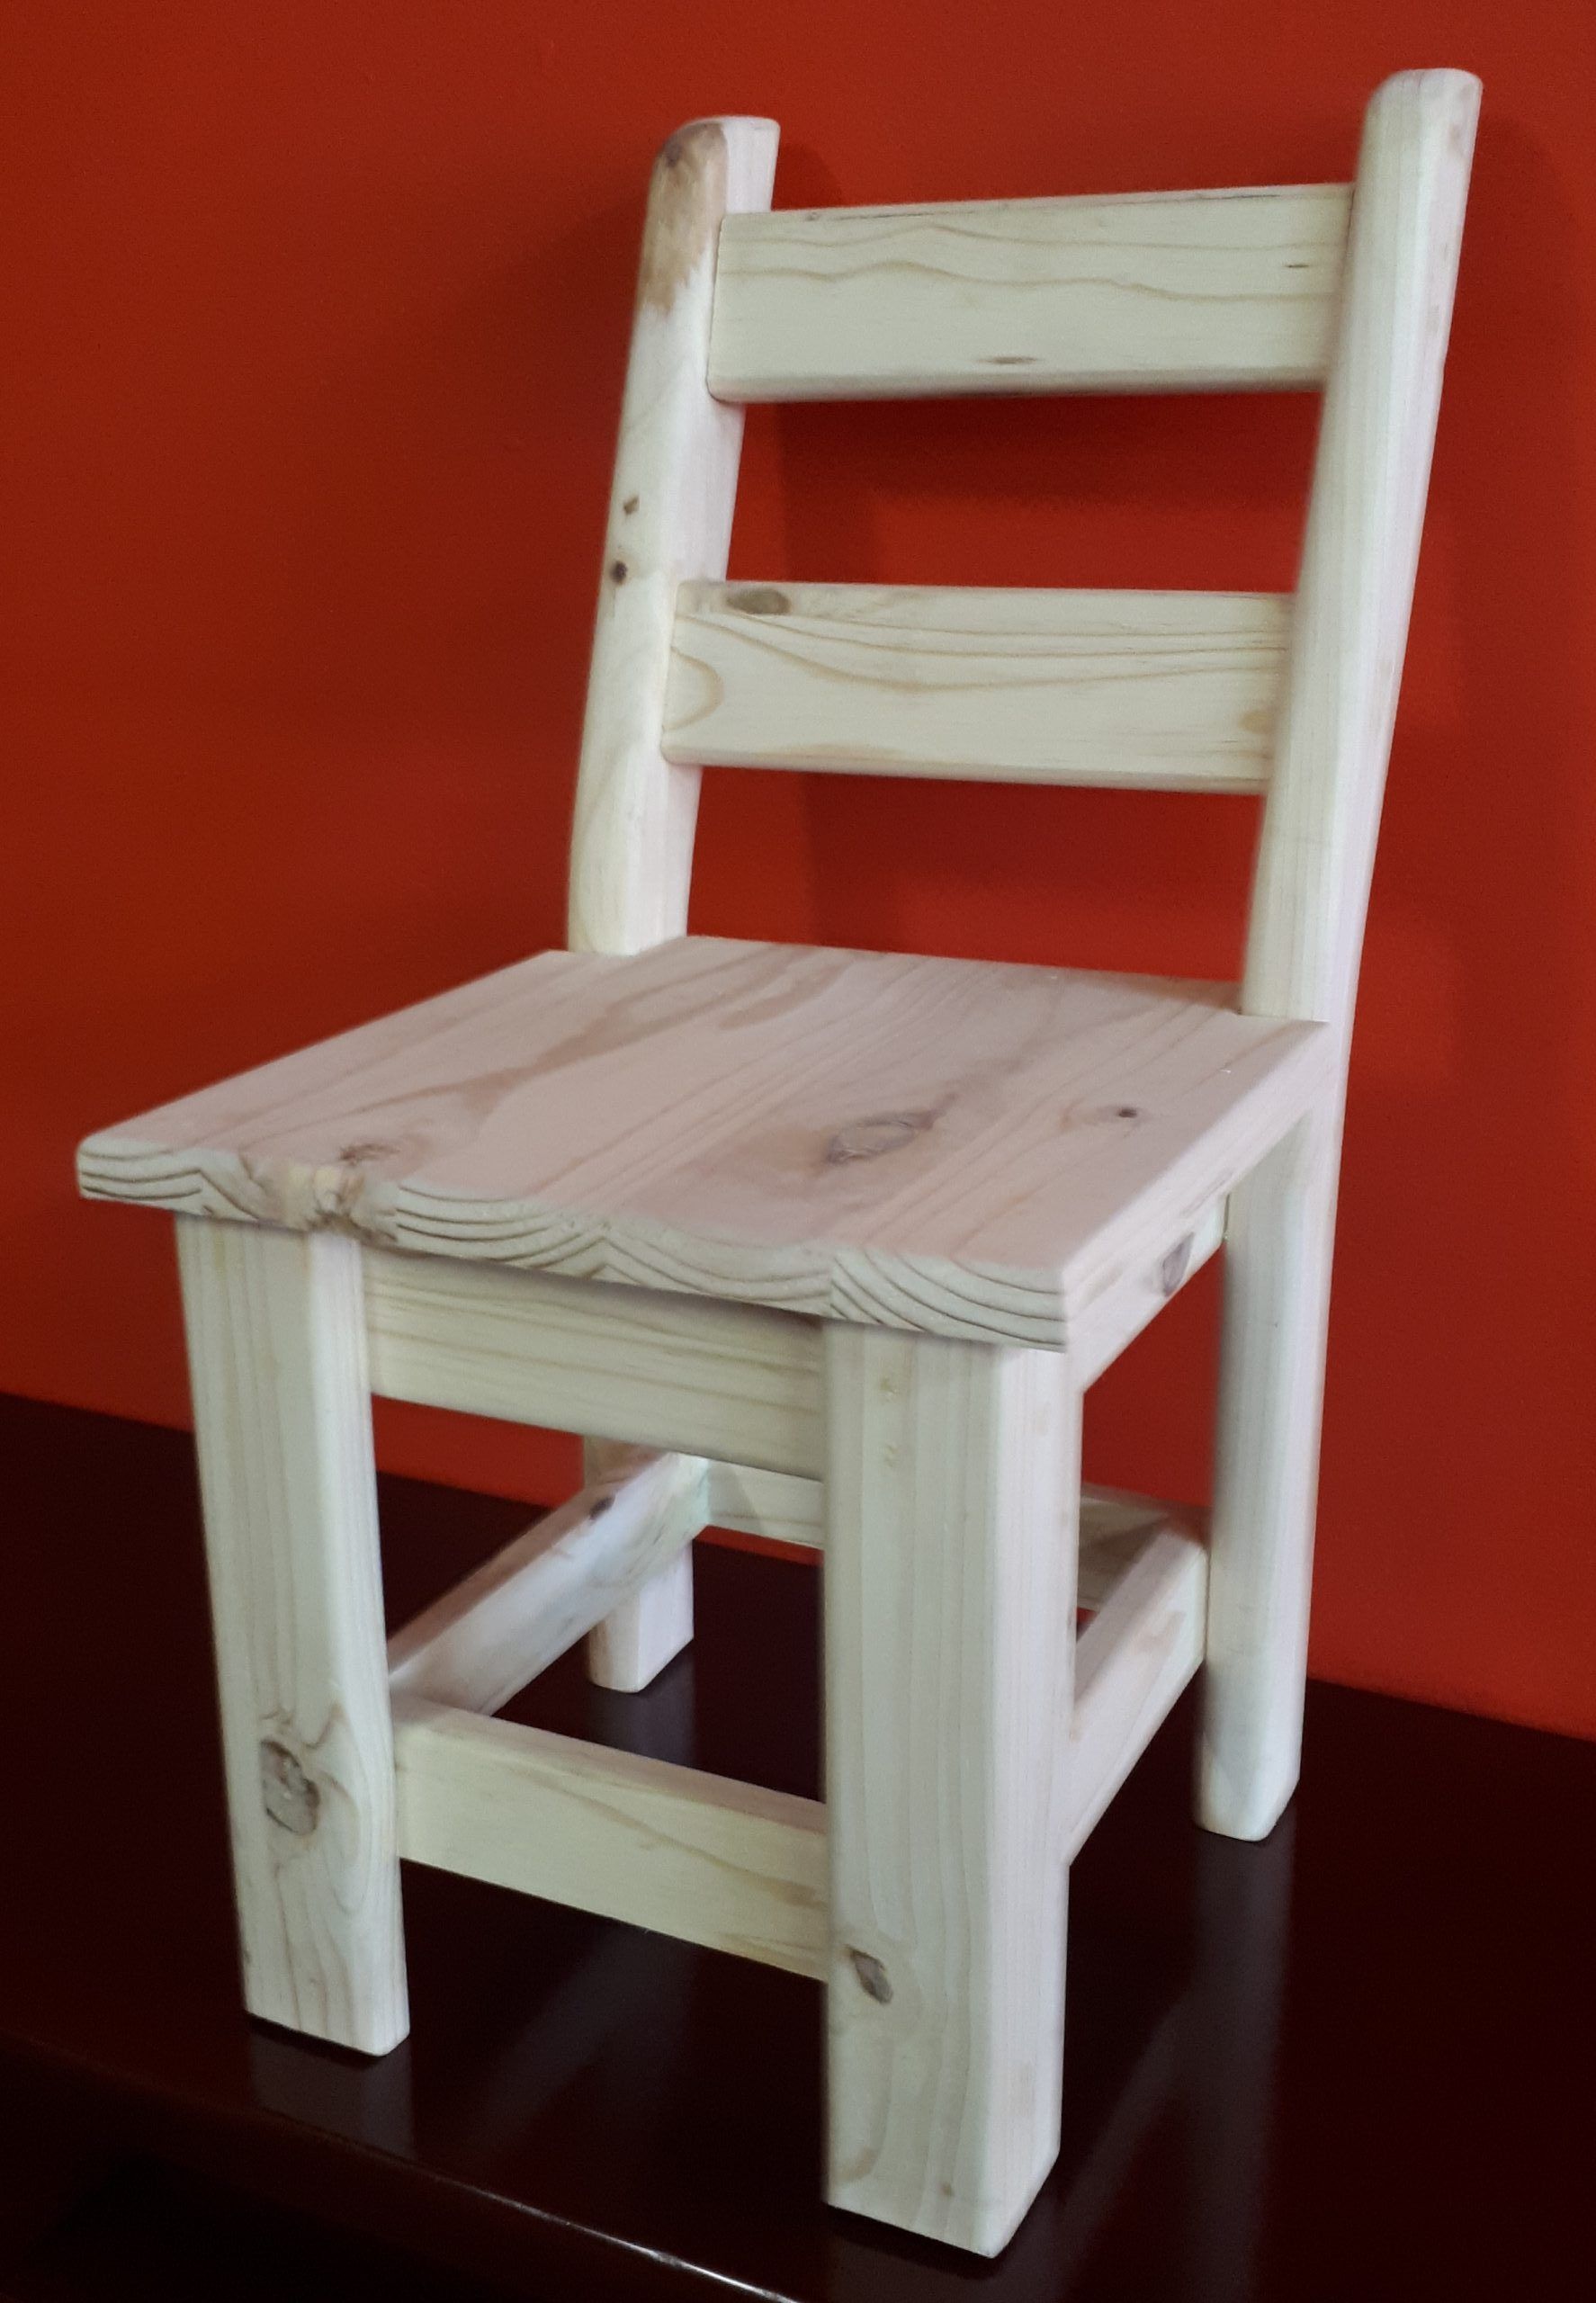 Kiddies Chairs R310 Raw Or R450 Varnished (View 10 of 15)